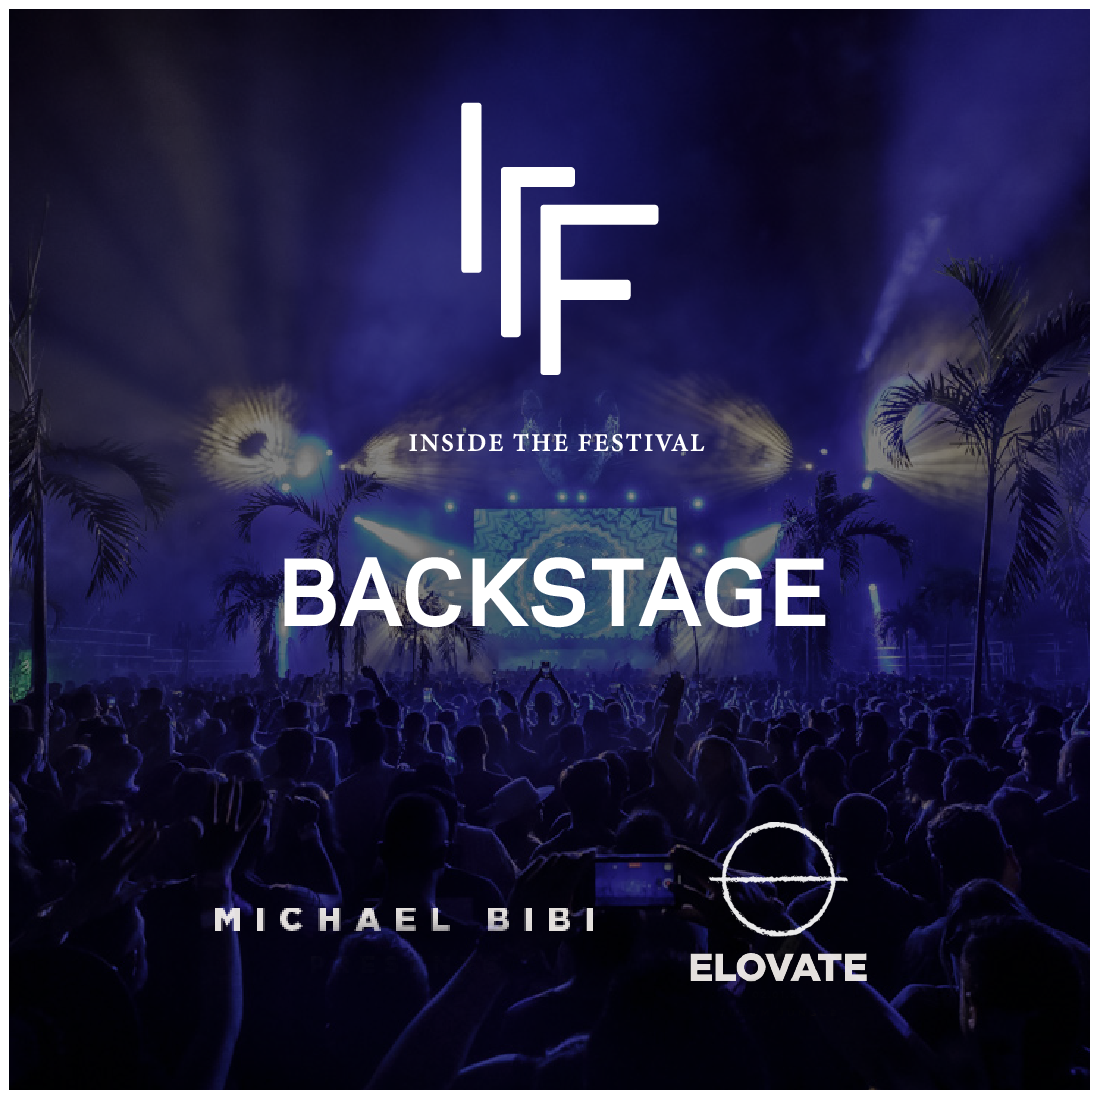 Michael Bibi present ELOVATE BACKSTAGE: January 2nd and 3rd